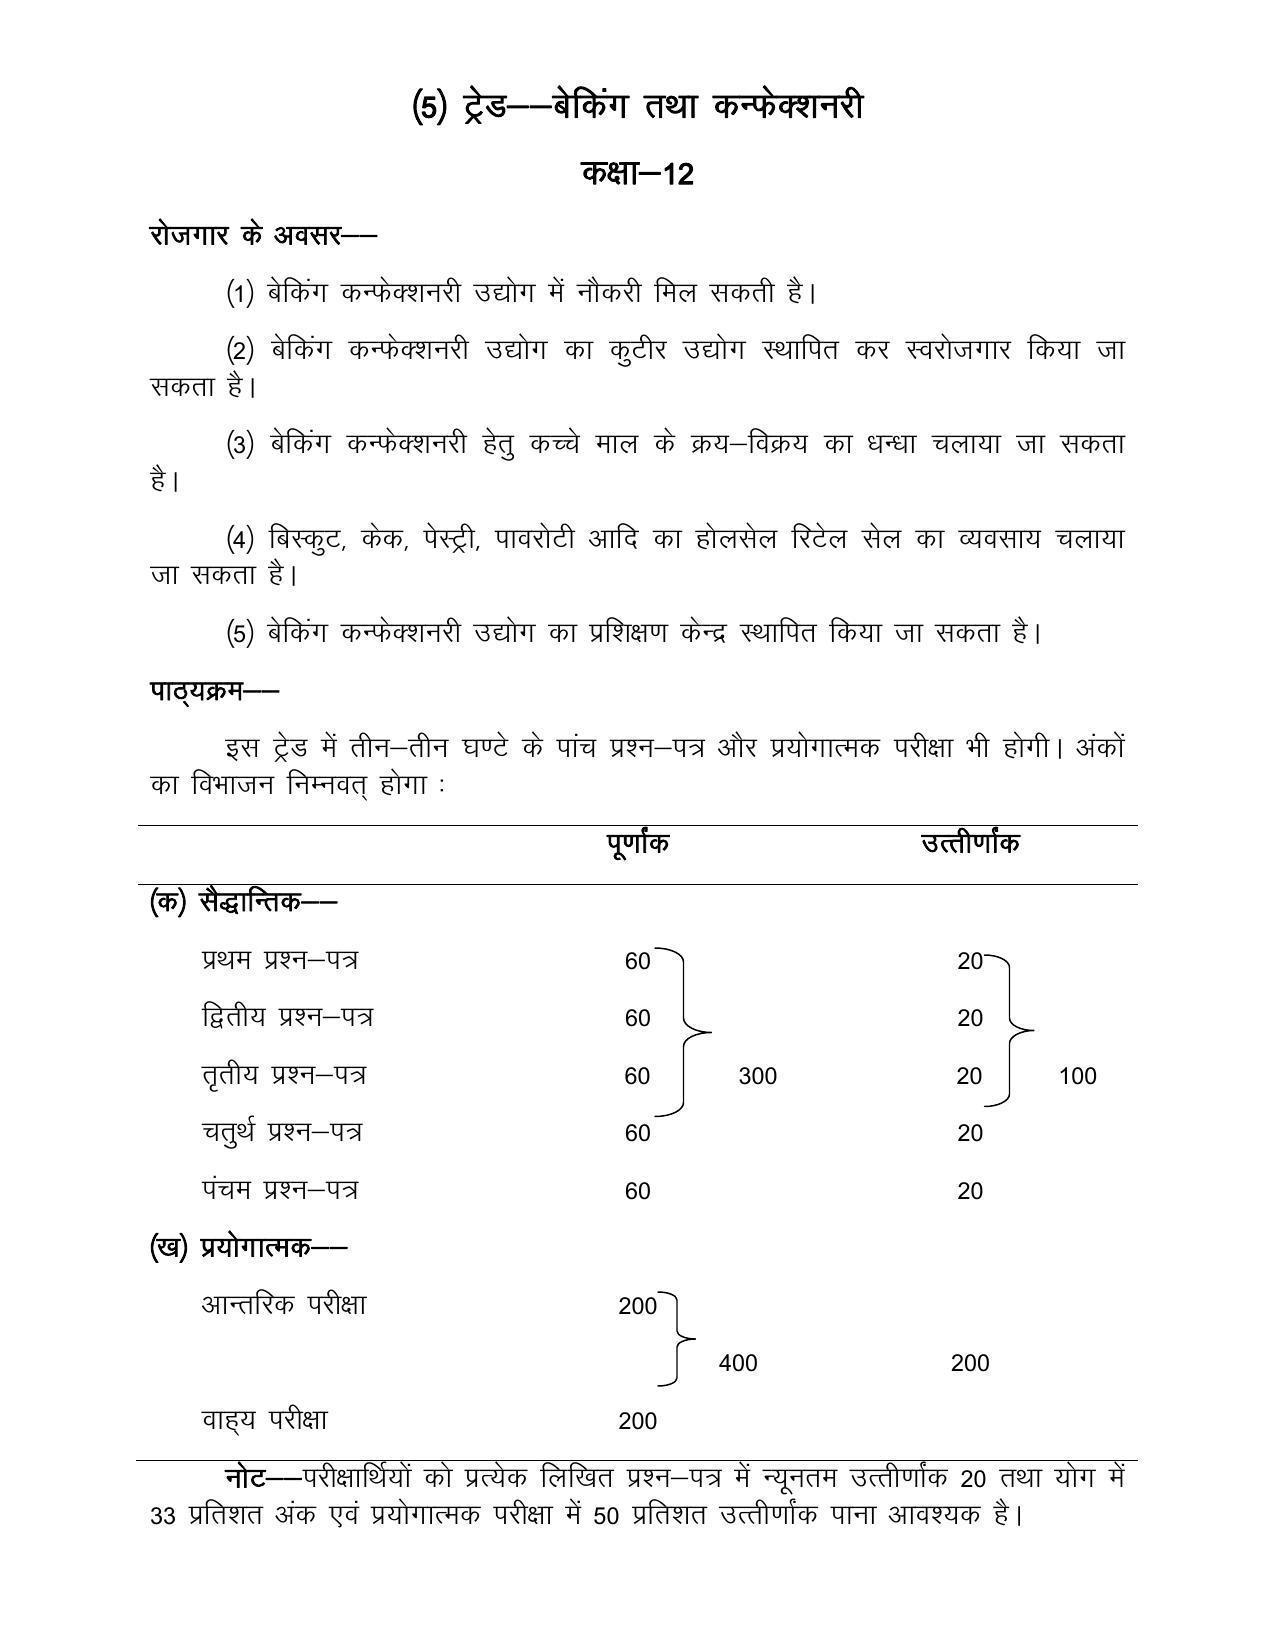 UP Board Class 12- Trade Subjects Syllabus Trade – 5 Baking & Confectionary - Page 1